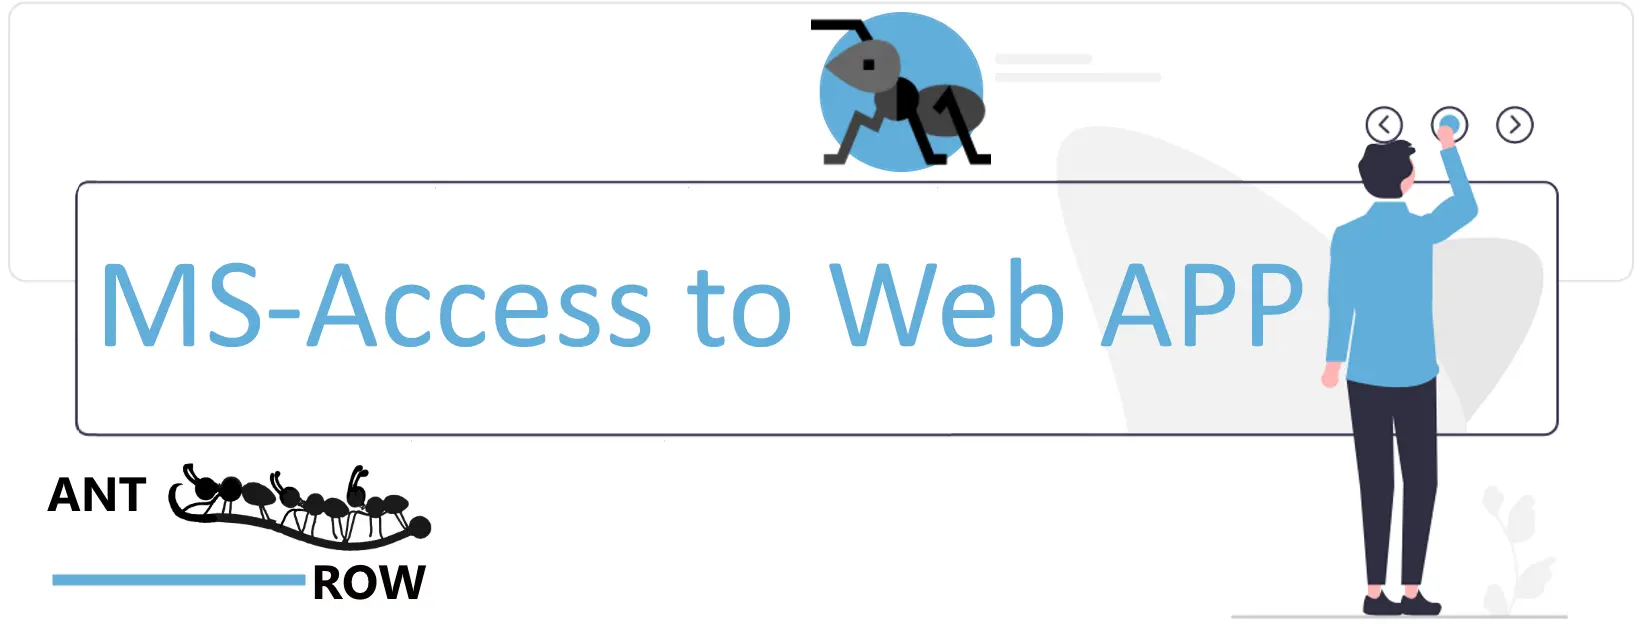 Antrow Is Helping To Save Time and Effort By Easily Converting MS-Access applications to An Online Web App